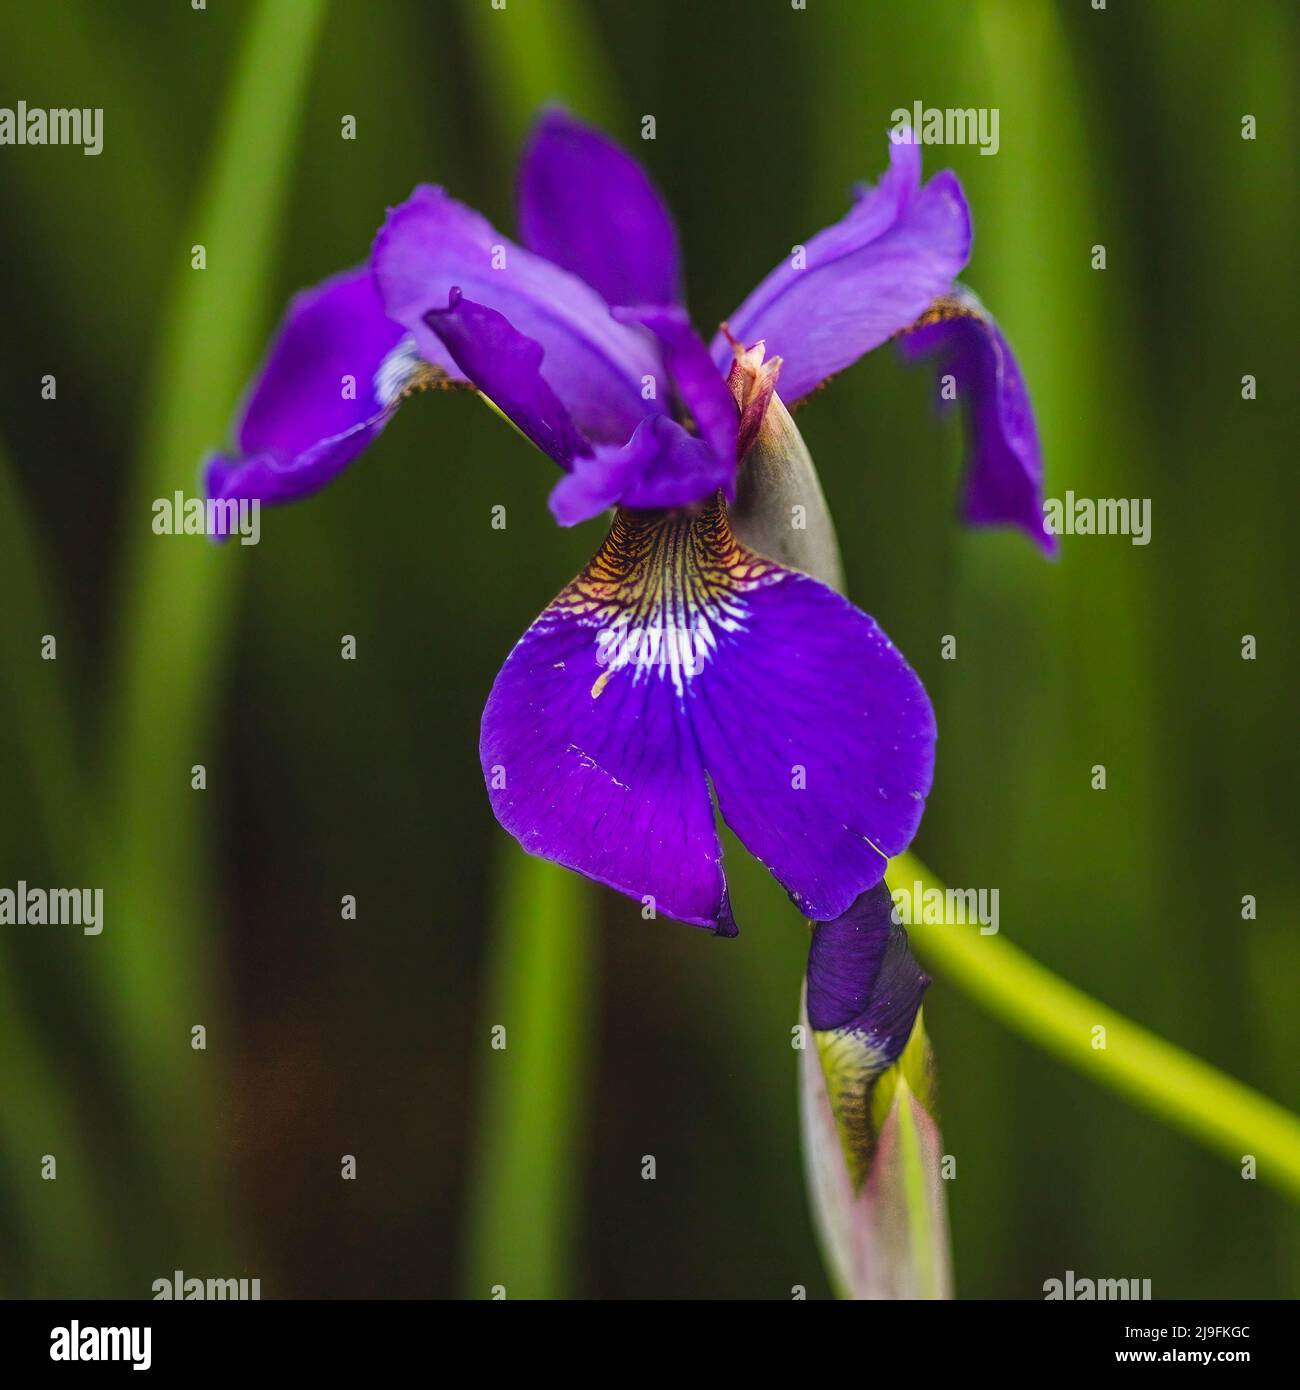 solitary perennial Japanese Iris blooms in the front garden Stock Photo